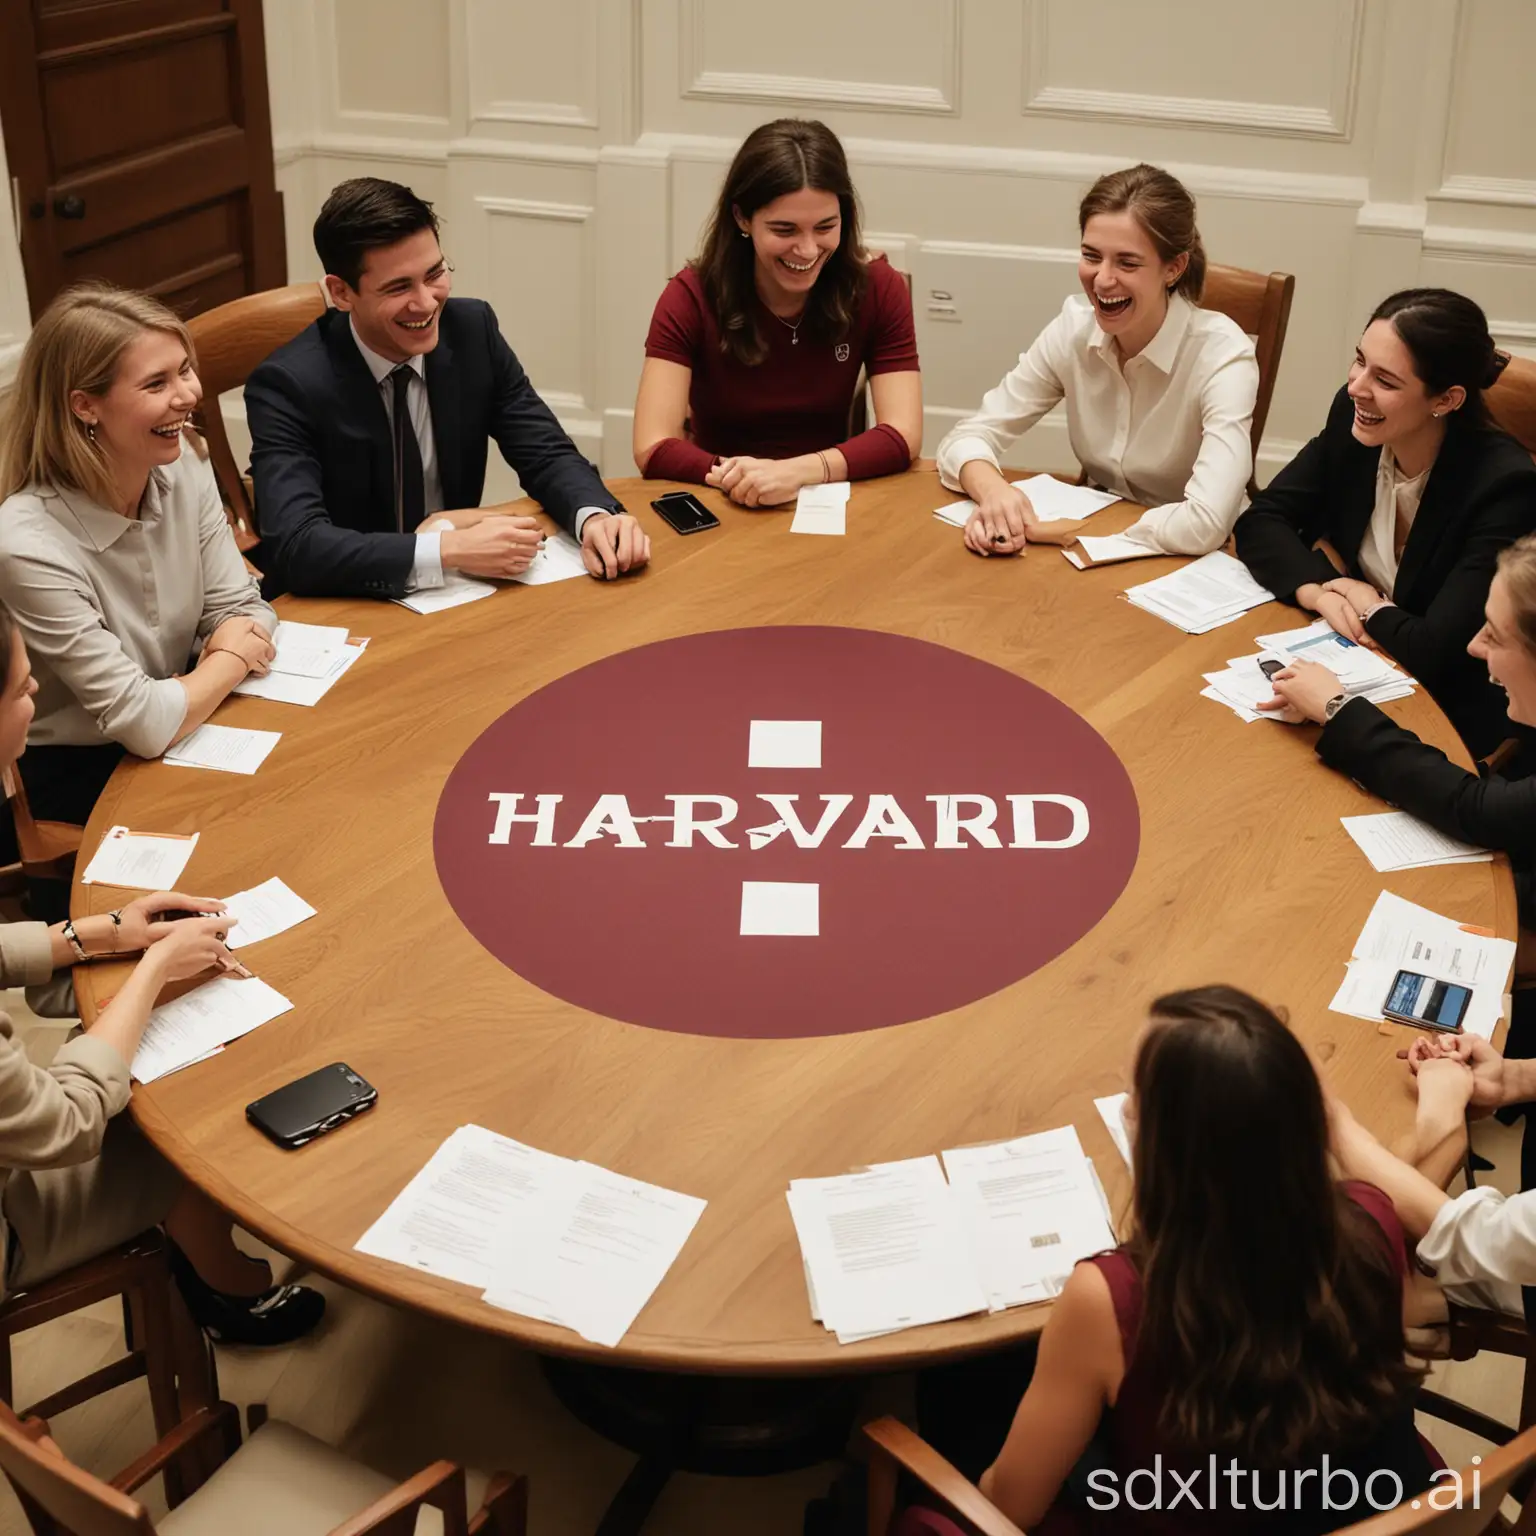 Harvard admissions committee sitting around a circular table laughing and pressing the reject button